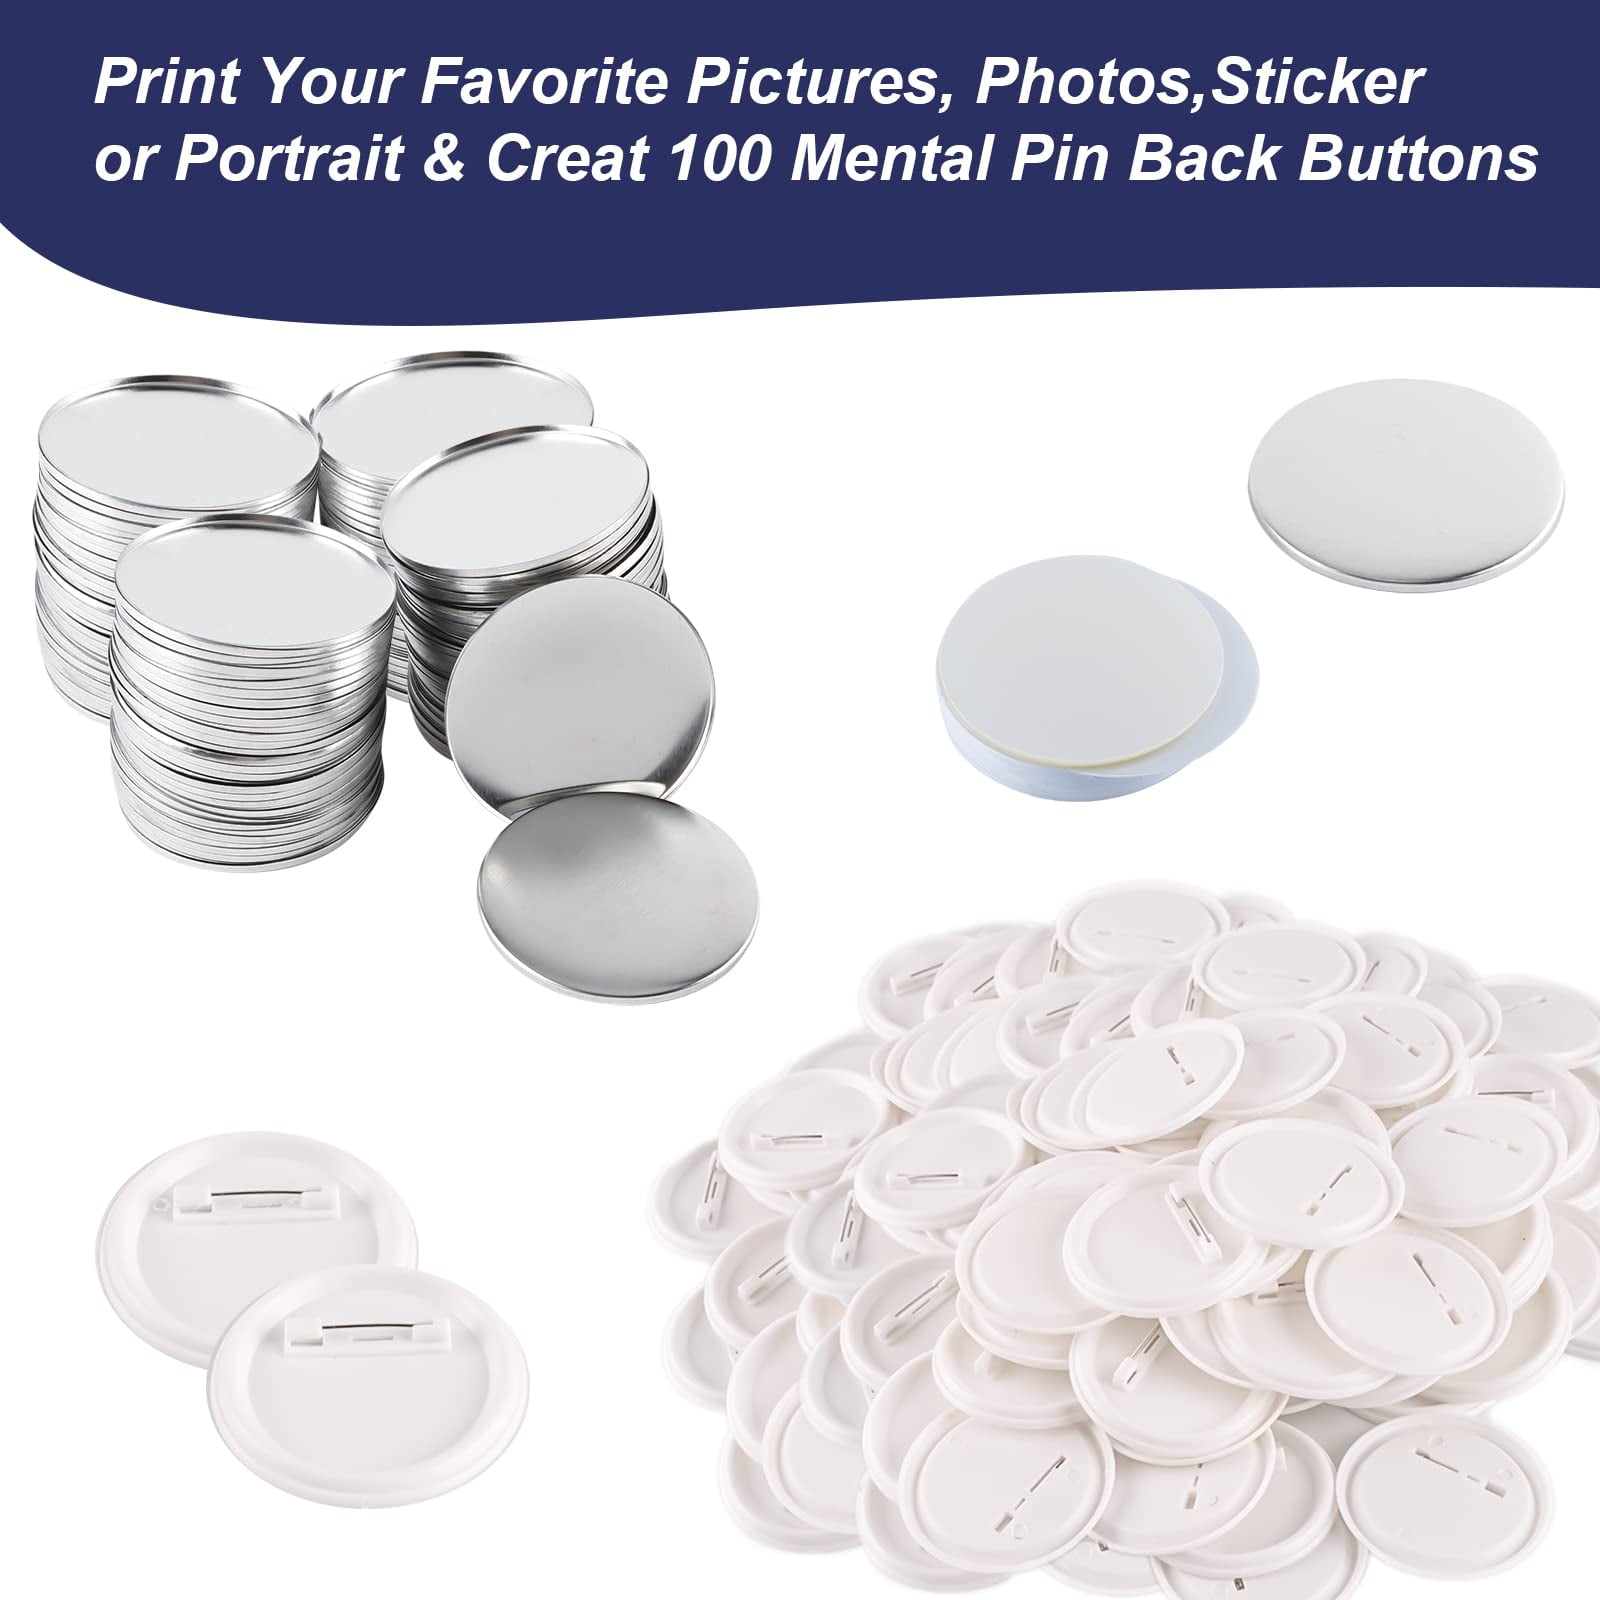  200 Sets 58mm/2.25 inch Blank Button Supplies Badges